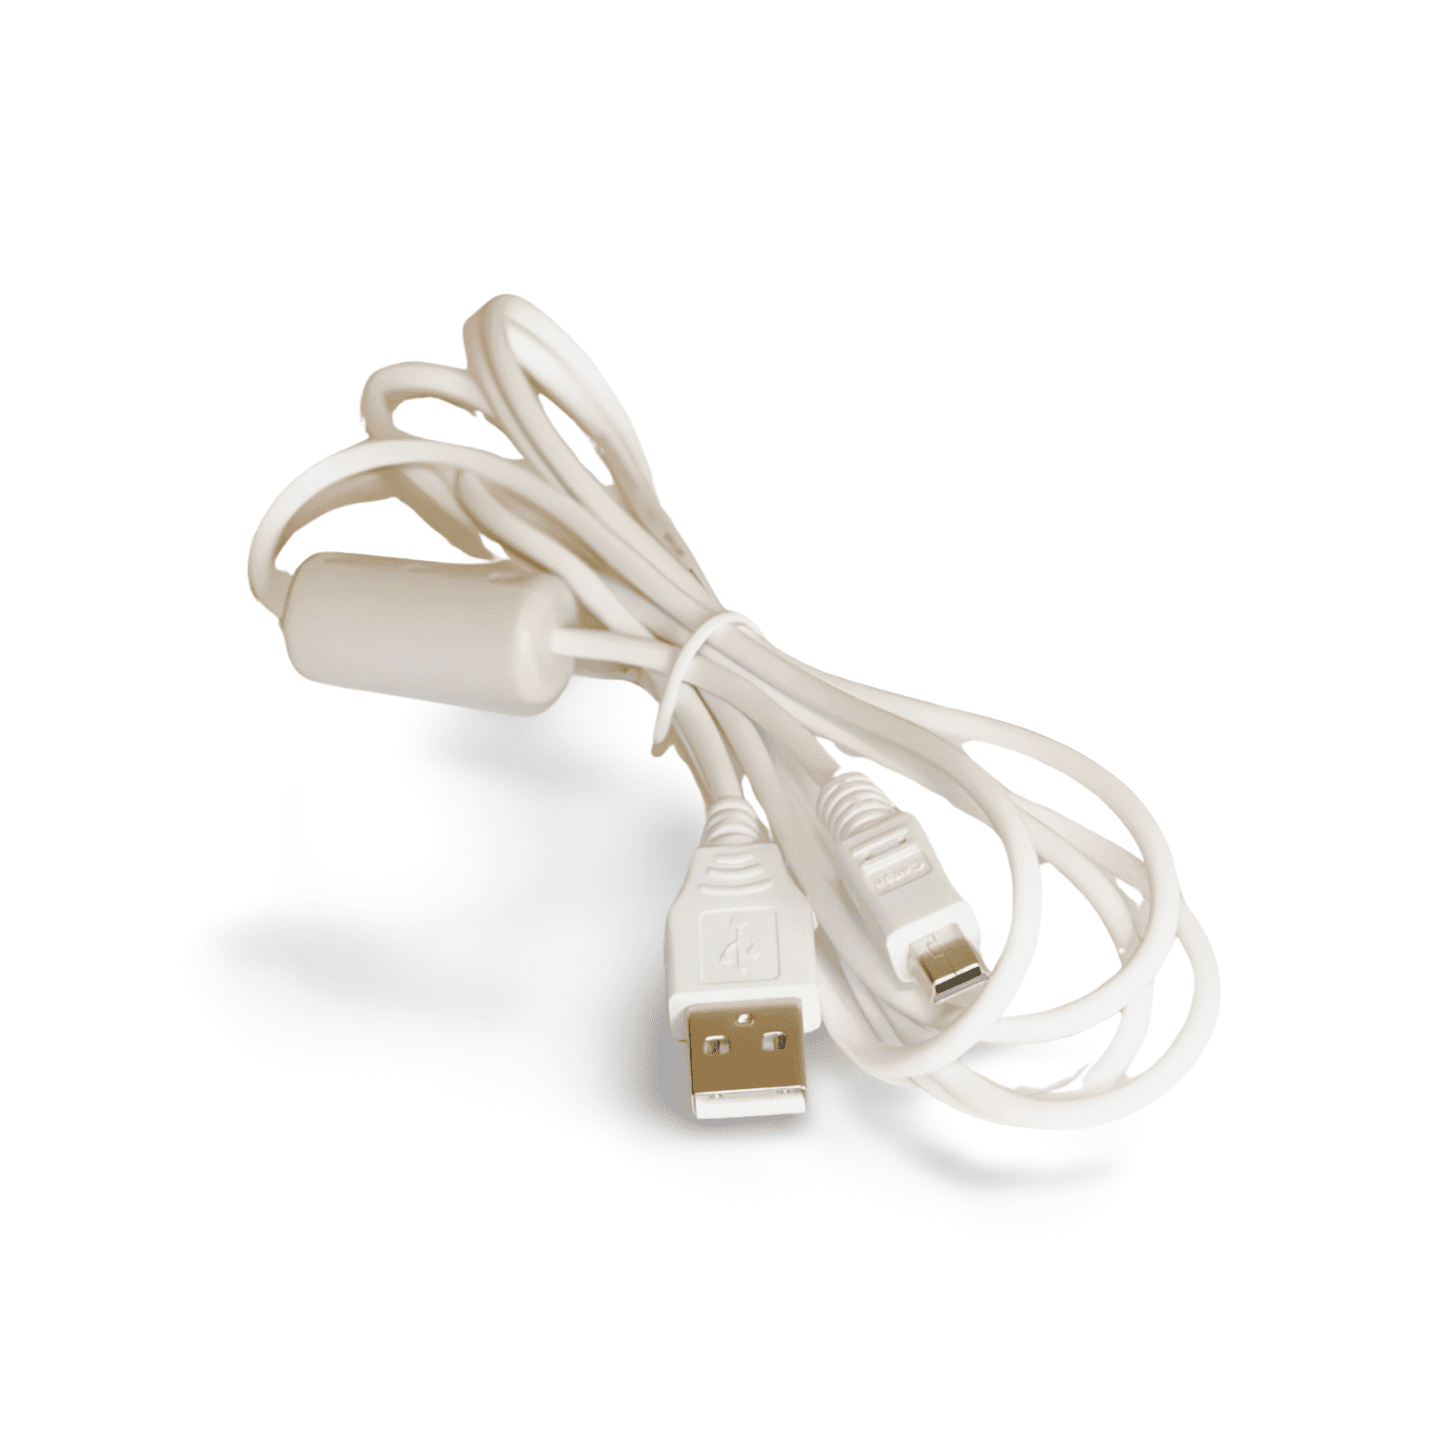 6ft Canon USB Cable IFC 400PCU for Canon Cameras Camcorders white